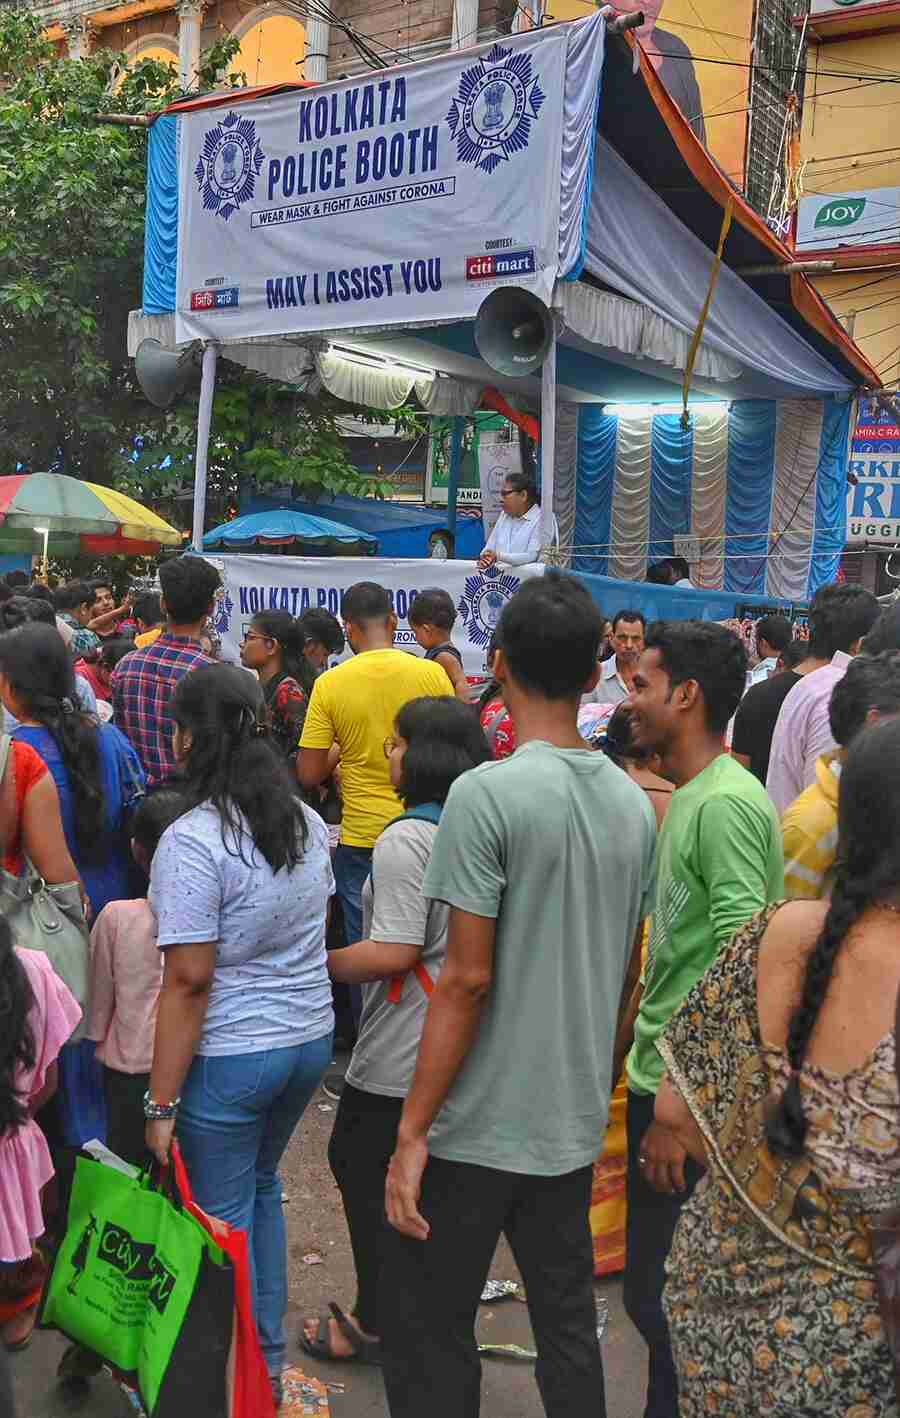 Kolkata police have set up an assistant booth at the New Market area to assist shoppers. With only 25 days left for Durga Puja, people are thronging malls and markets around the city  